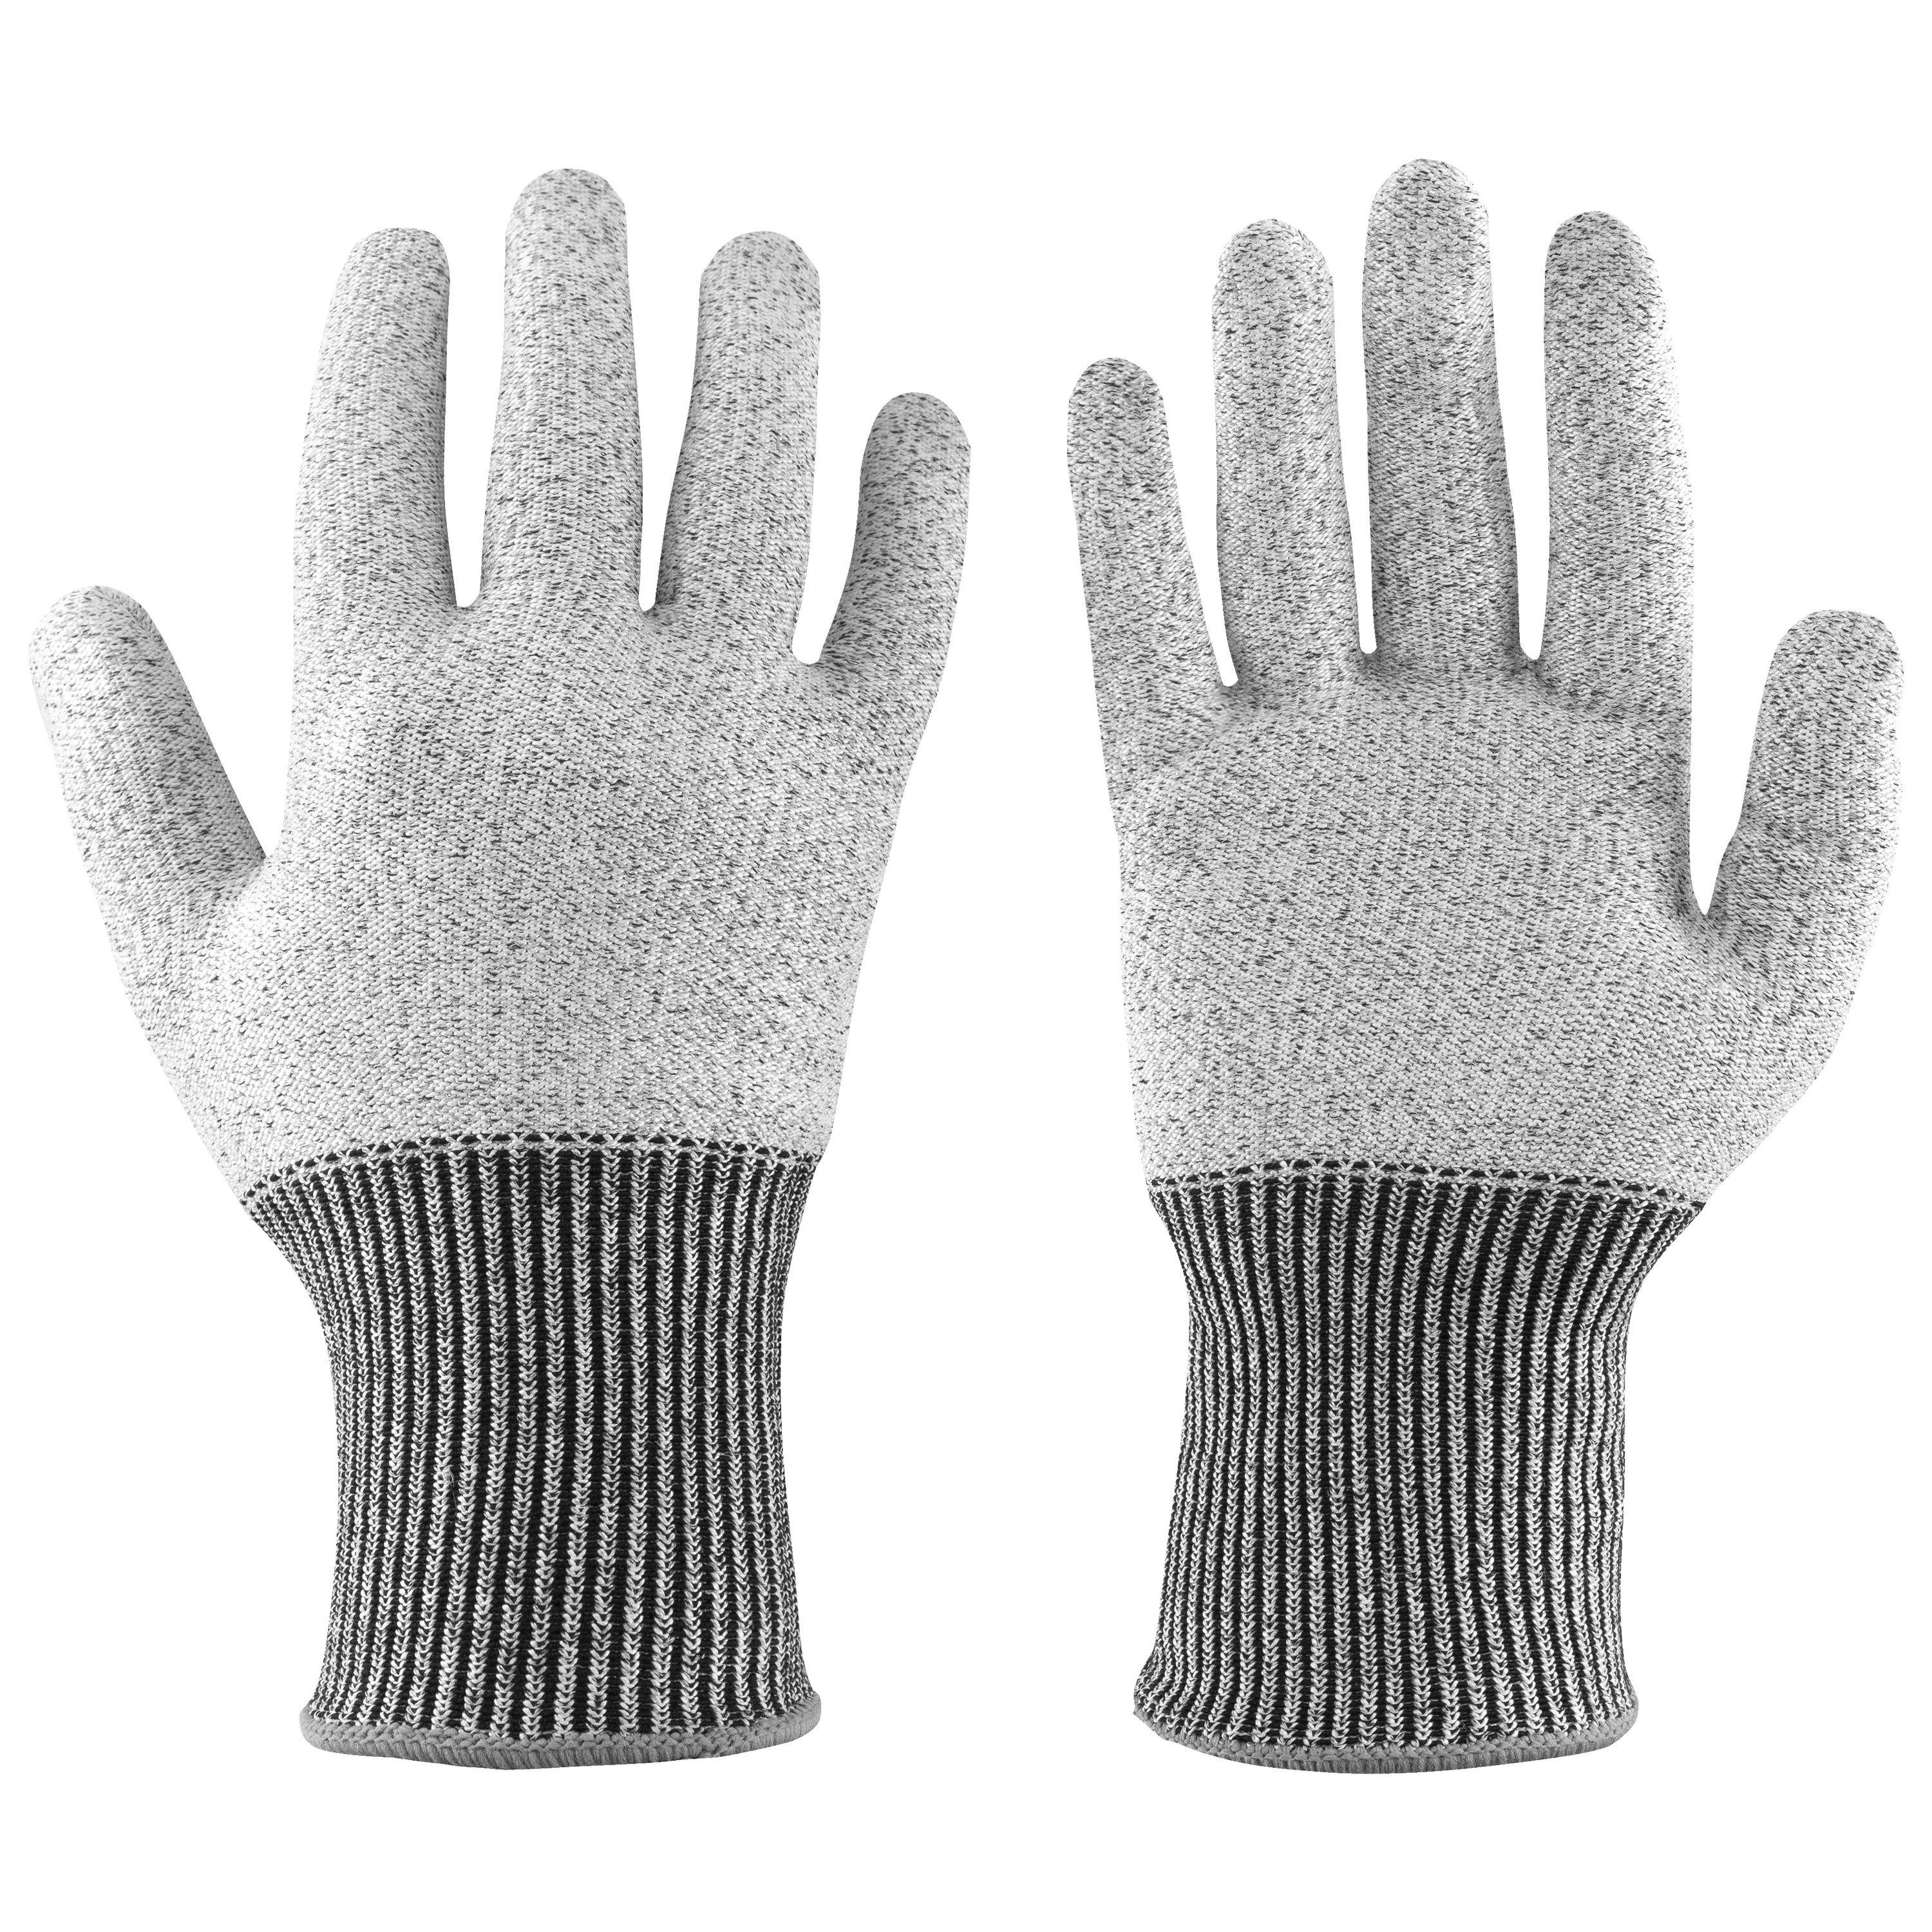 Anti-cut Glove, Knife Proof Cut Resistant Work Gloves, Black Chainmail  Safety Work Glove, Cutting Protective Gloves